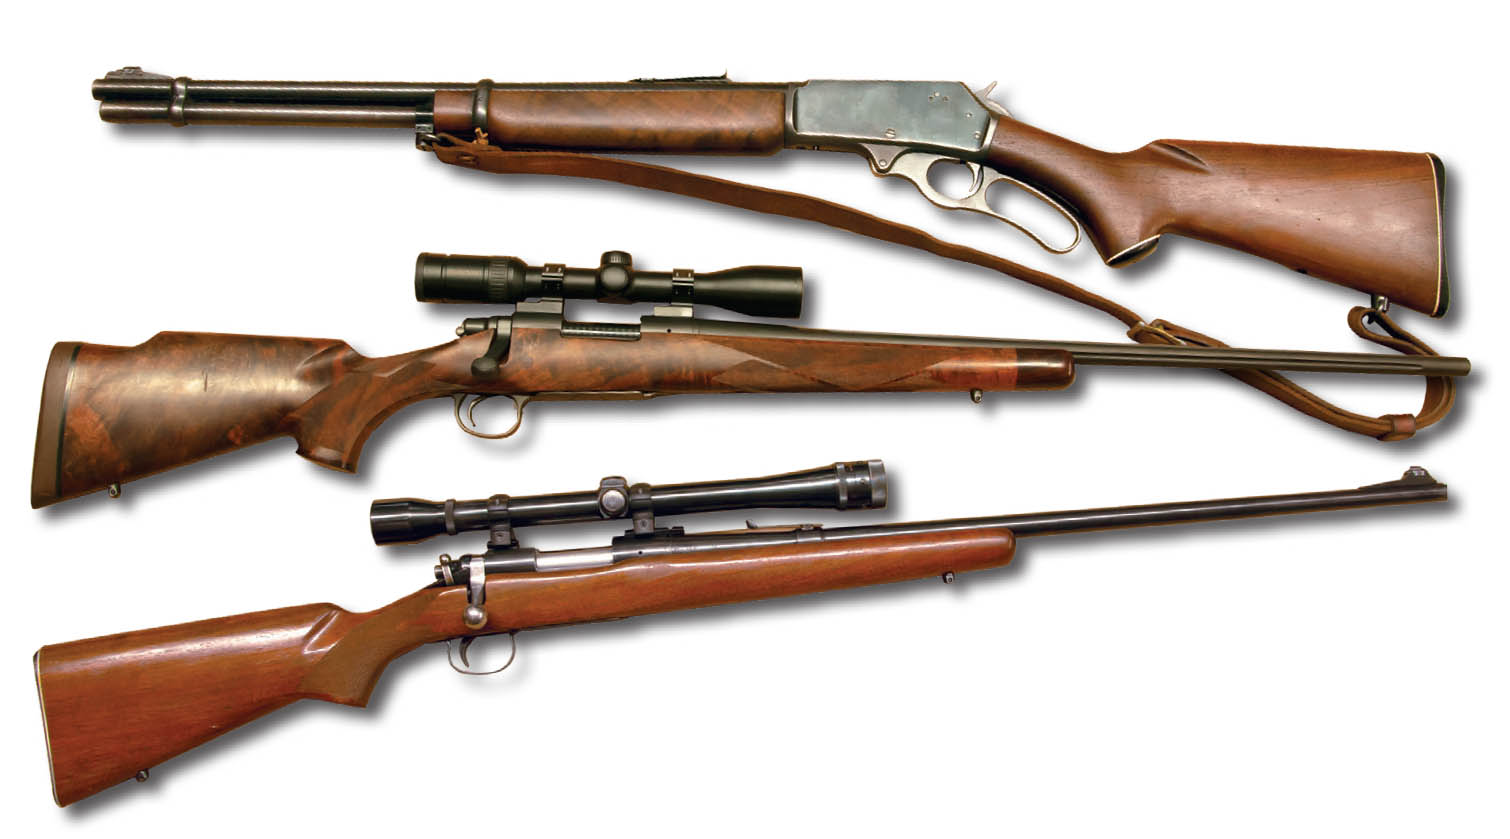 These rifles include (top to bottom) a cherished 1958 Marlin 336 .30-30, a Remington Custom Shop Model 700 6.5 Remington Magnum with a Swarovski Z3 3-9x 36mm scope and a Remington Model 722 .222 Remington with a Weaver K10 scope.